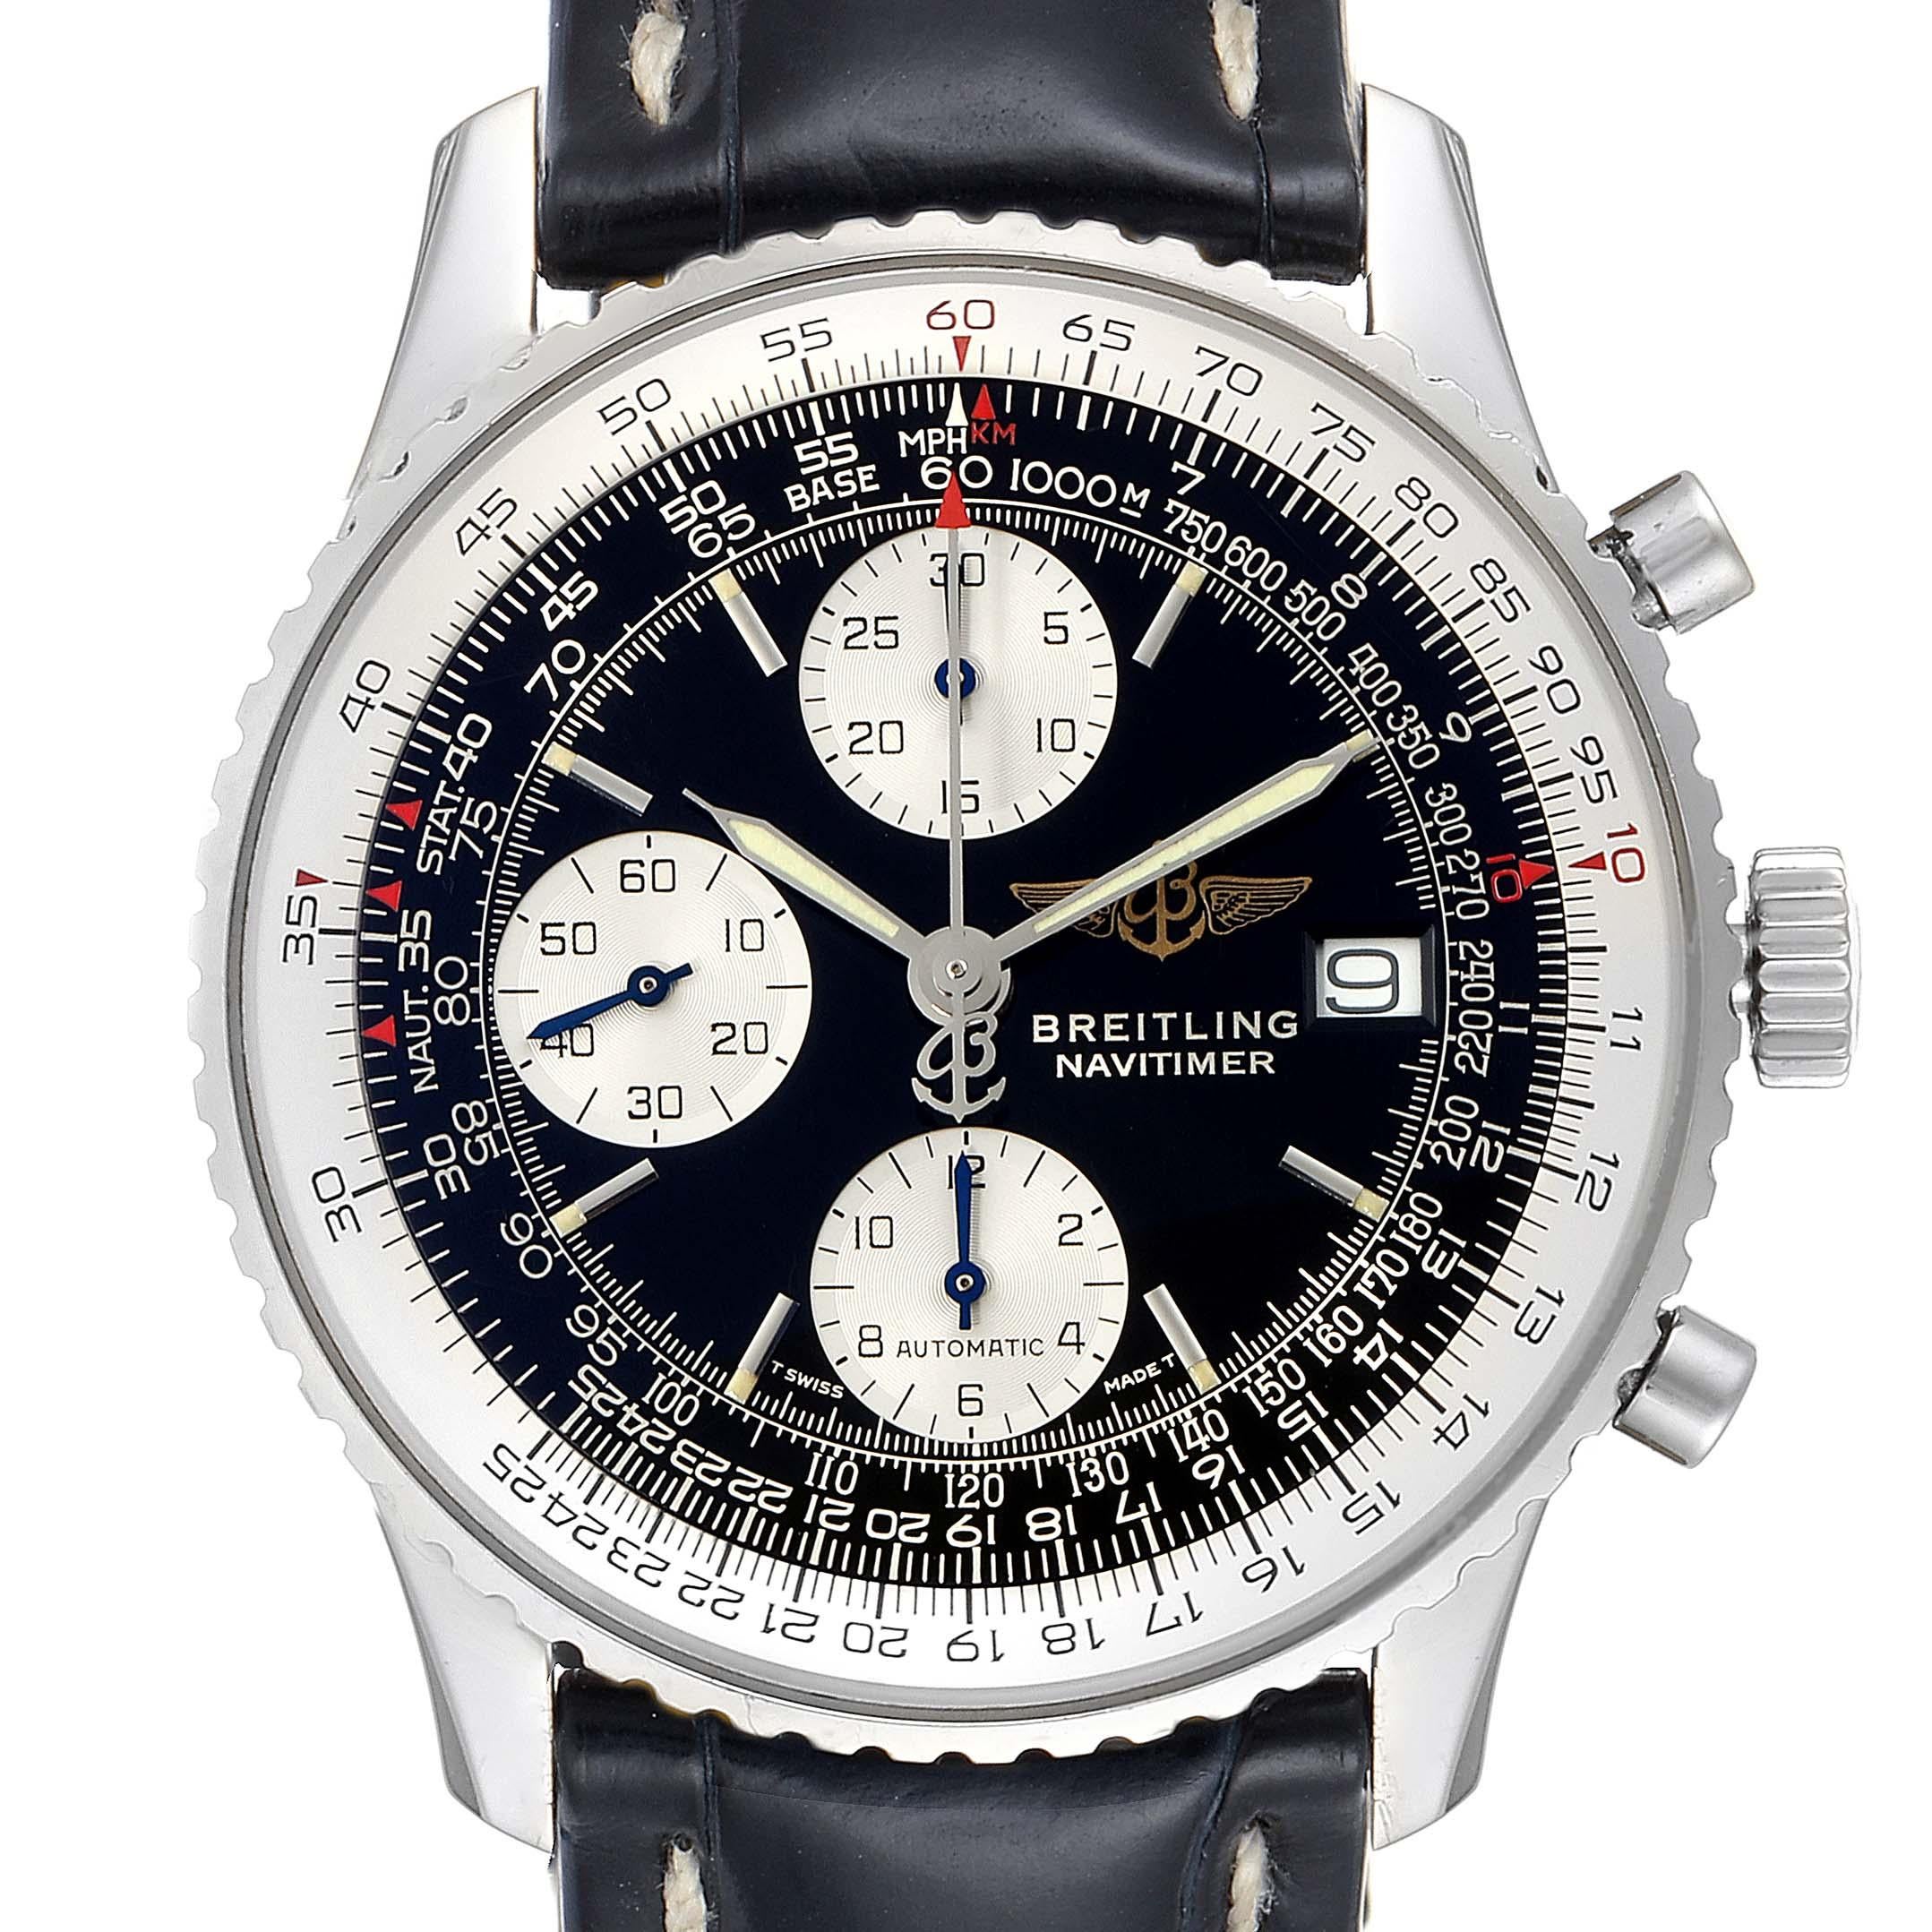 Breitling Navitimer II Black Dial Steel Mens Watch A13022. Self-winding automatic officially certified chronometer movement. Chronograph function. Straight-line lever escapement, monometallic balance, shock absorber, self-compensating flat balance